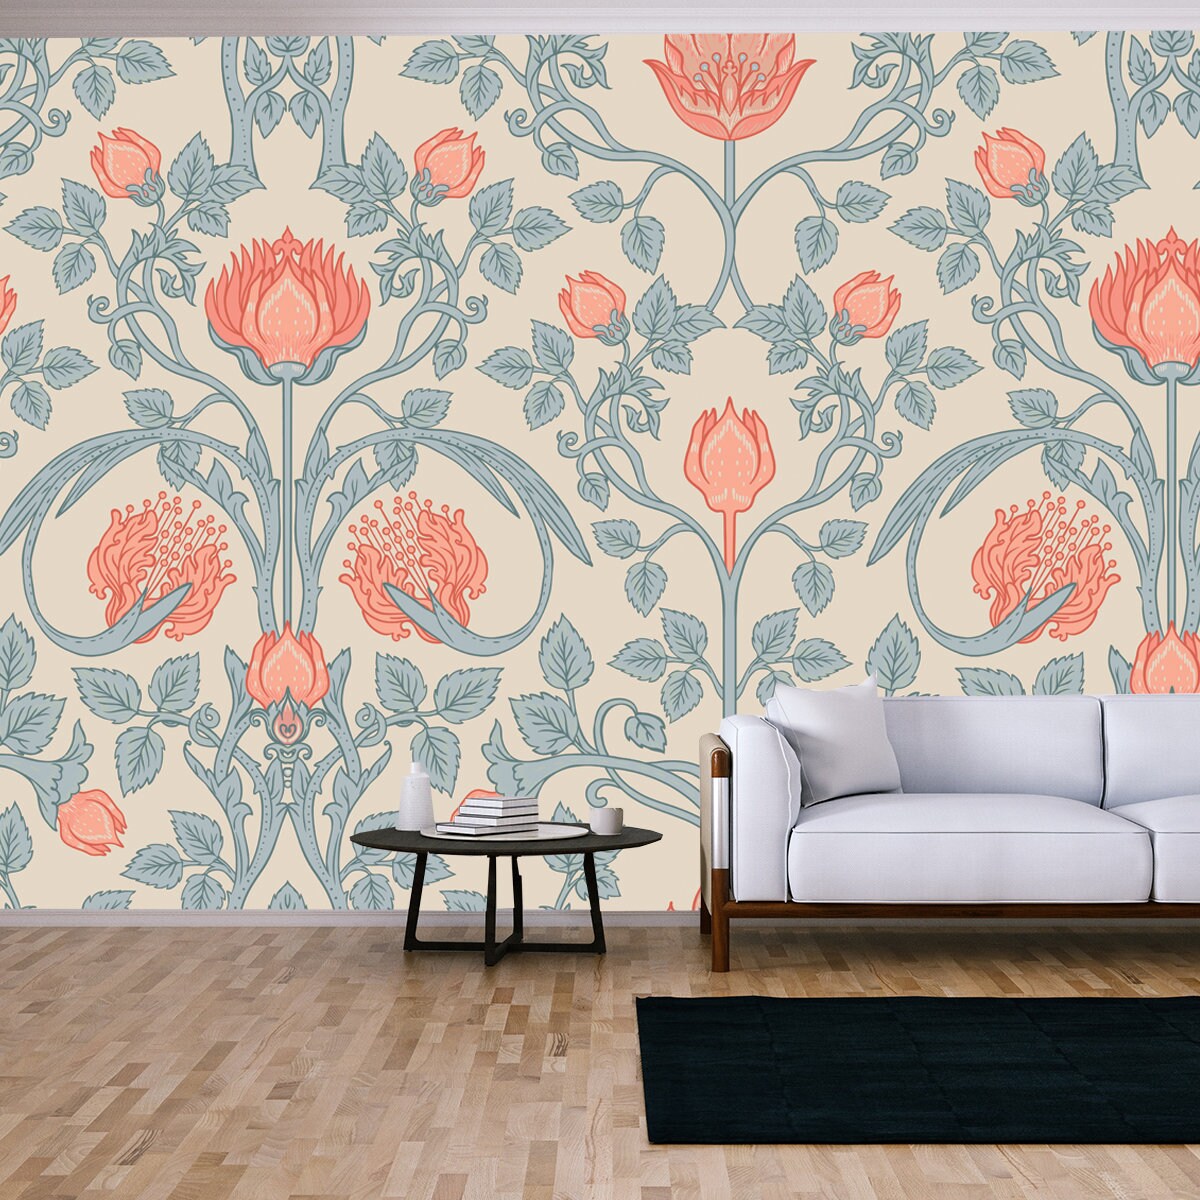 Pink and Blue Retro Vintage Enchanted Floral Wallpaper Living Room Mural